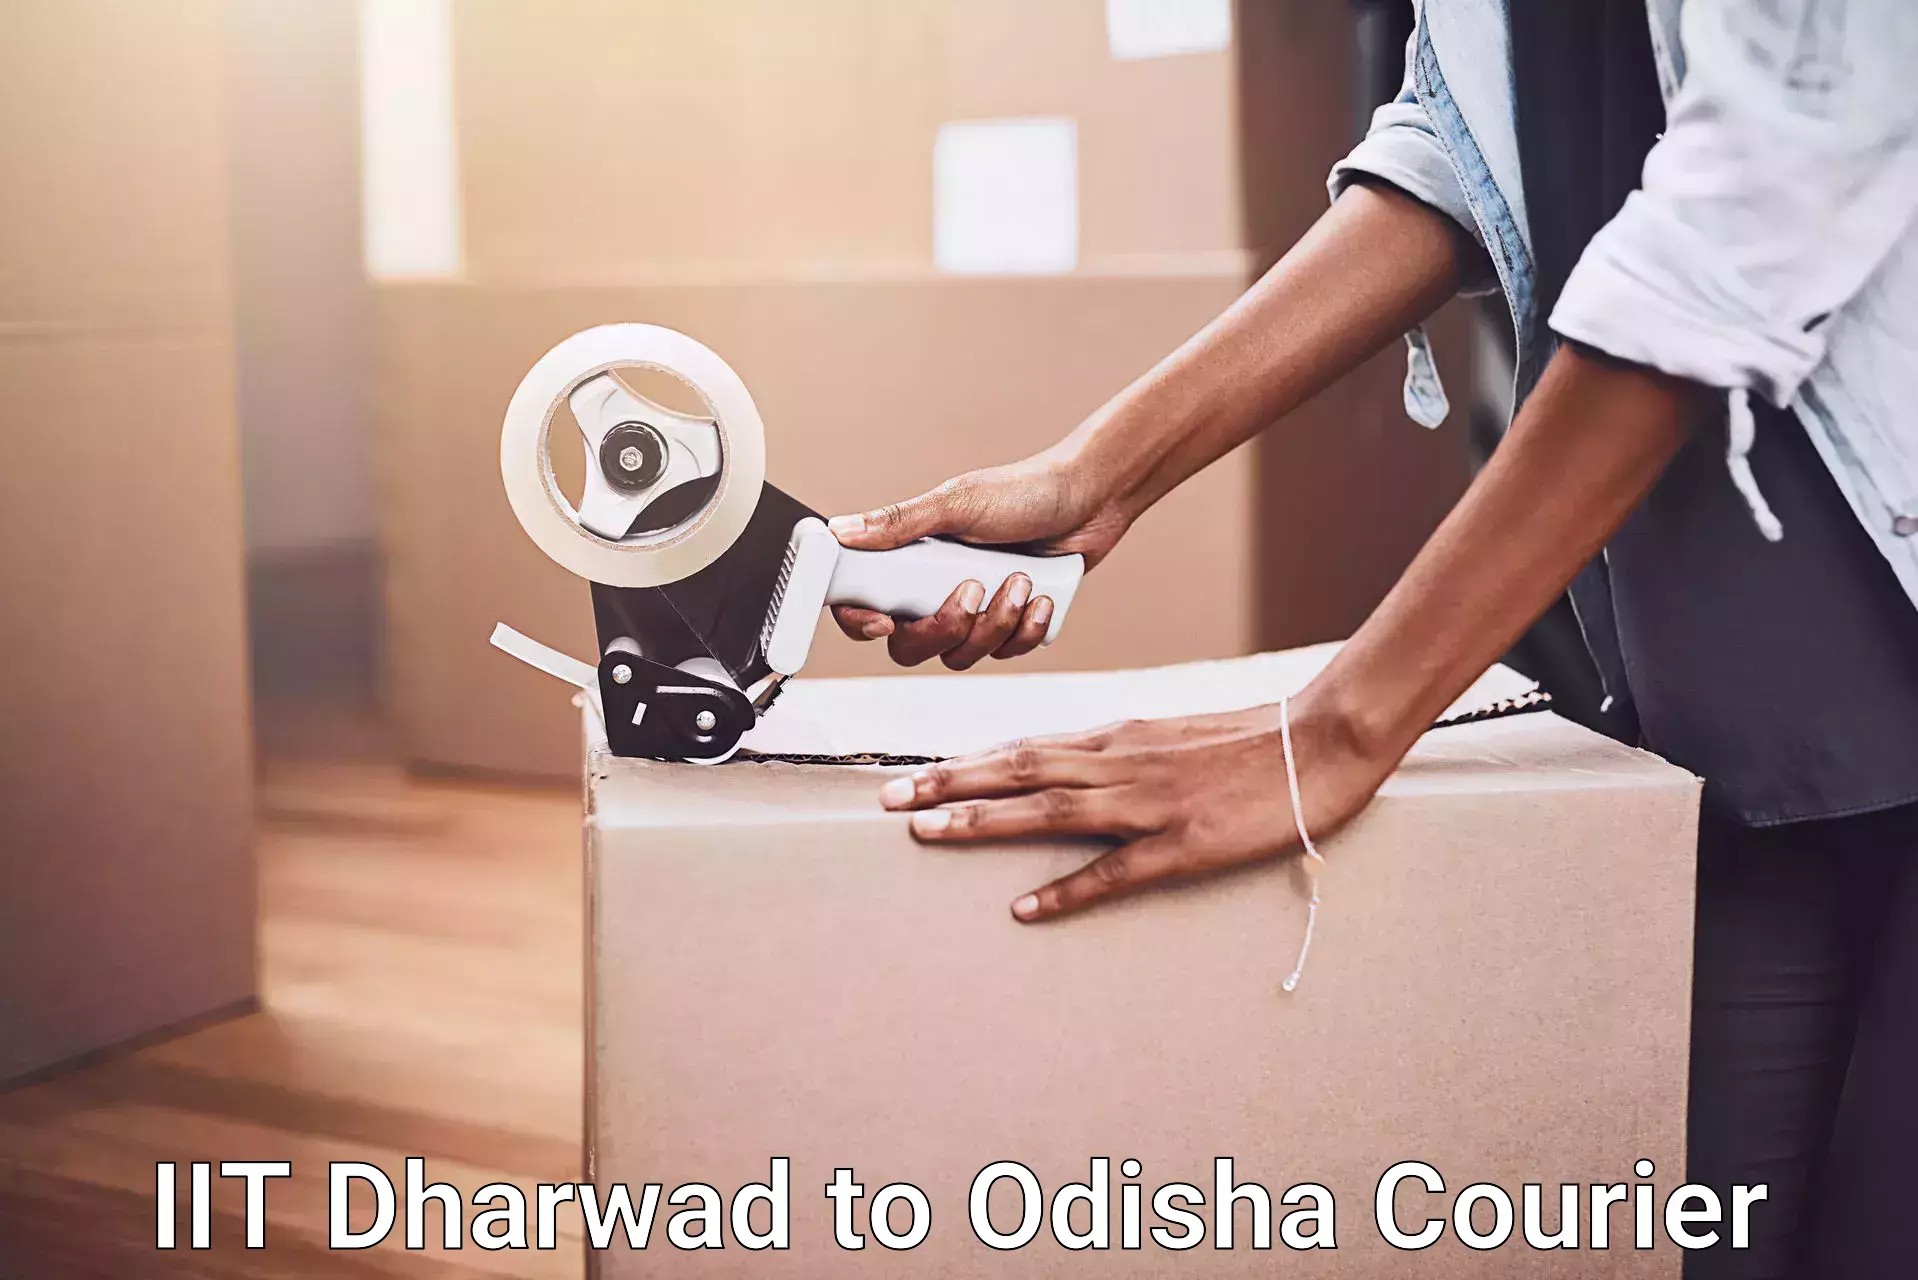 Furniture moving specialists IIT Dharwad to Sohela